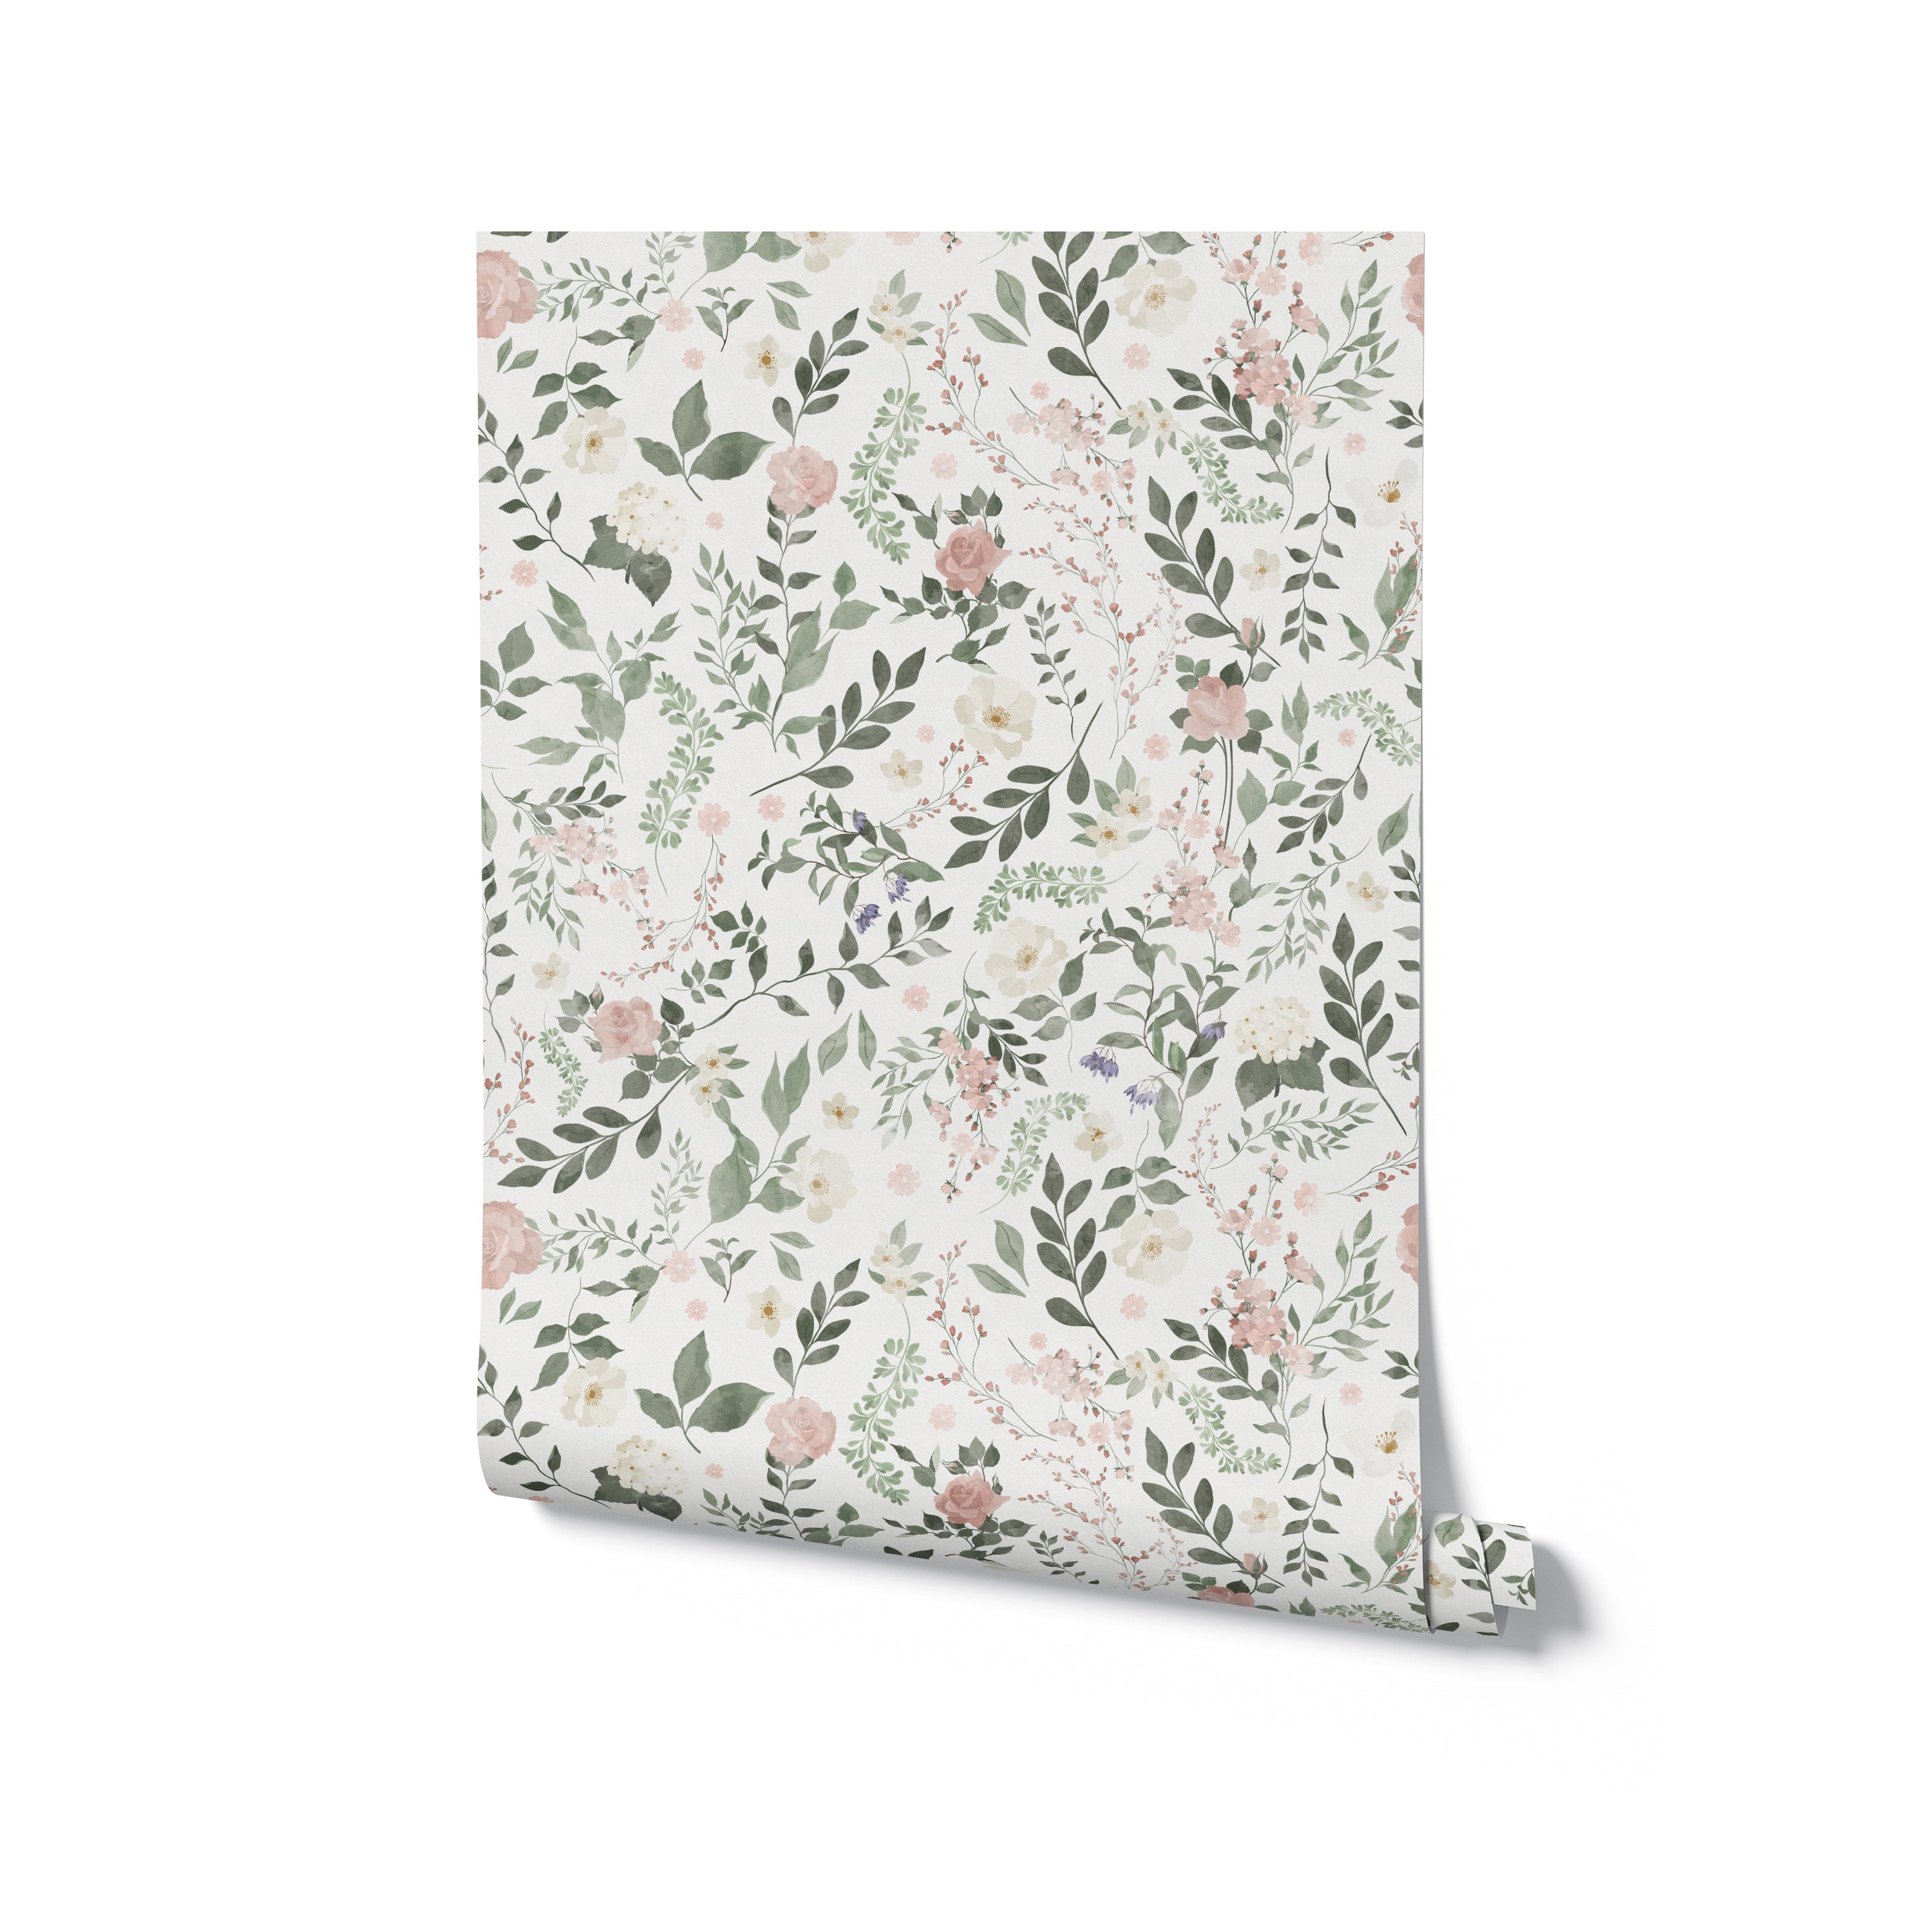 A single roll of Enchanted Symphony Wallpaper, unrolled to reveal its elegant floral pattern with green leaves and pink flowers on a white background